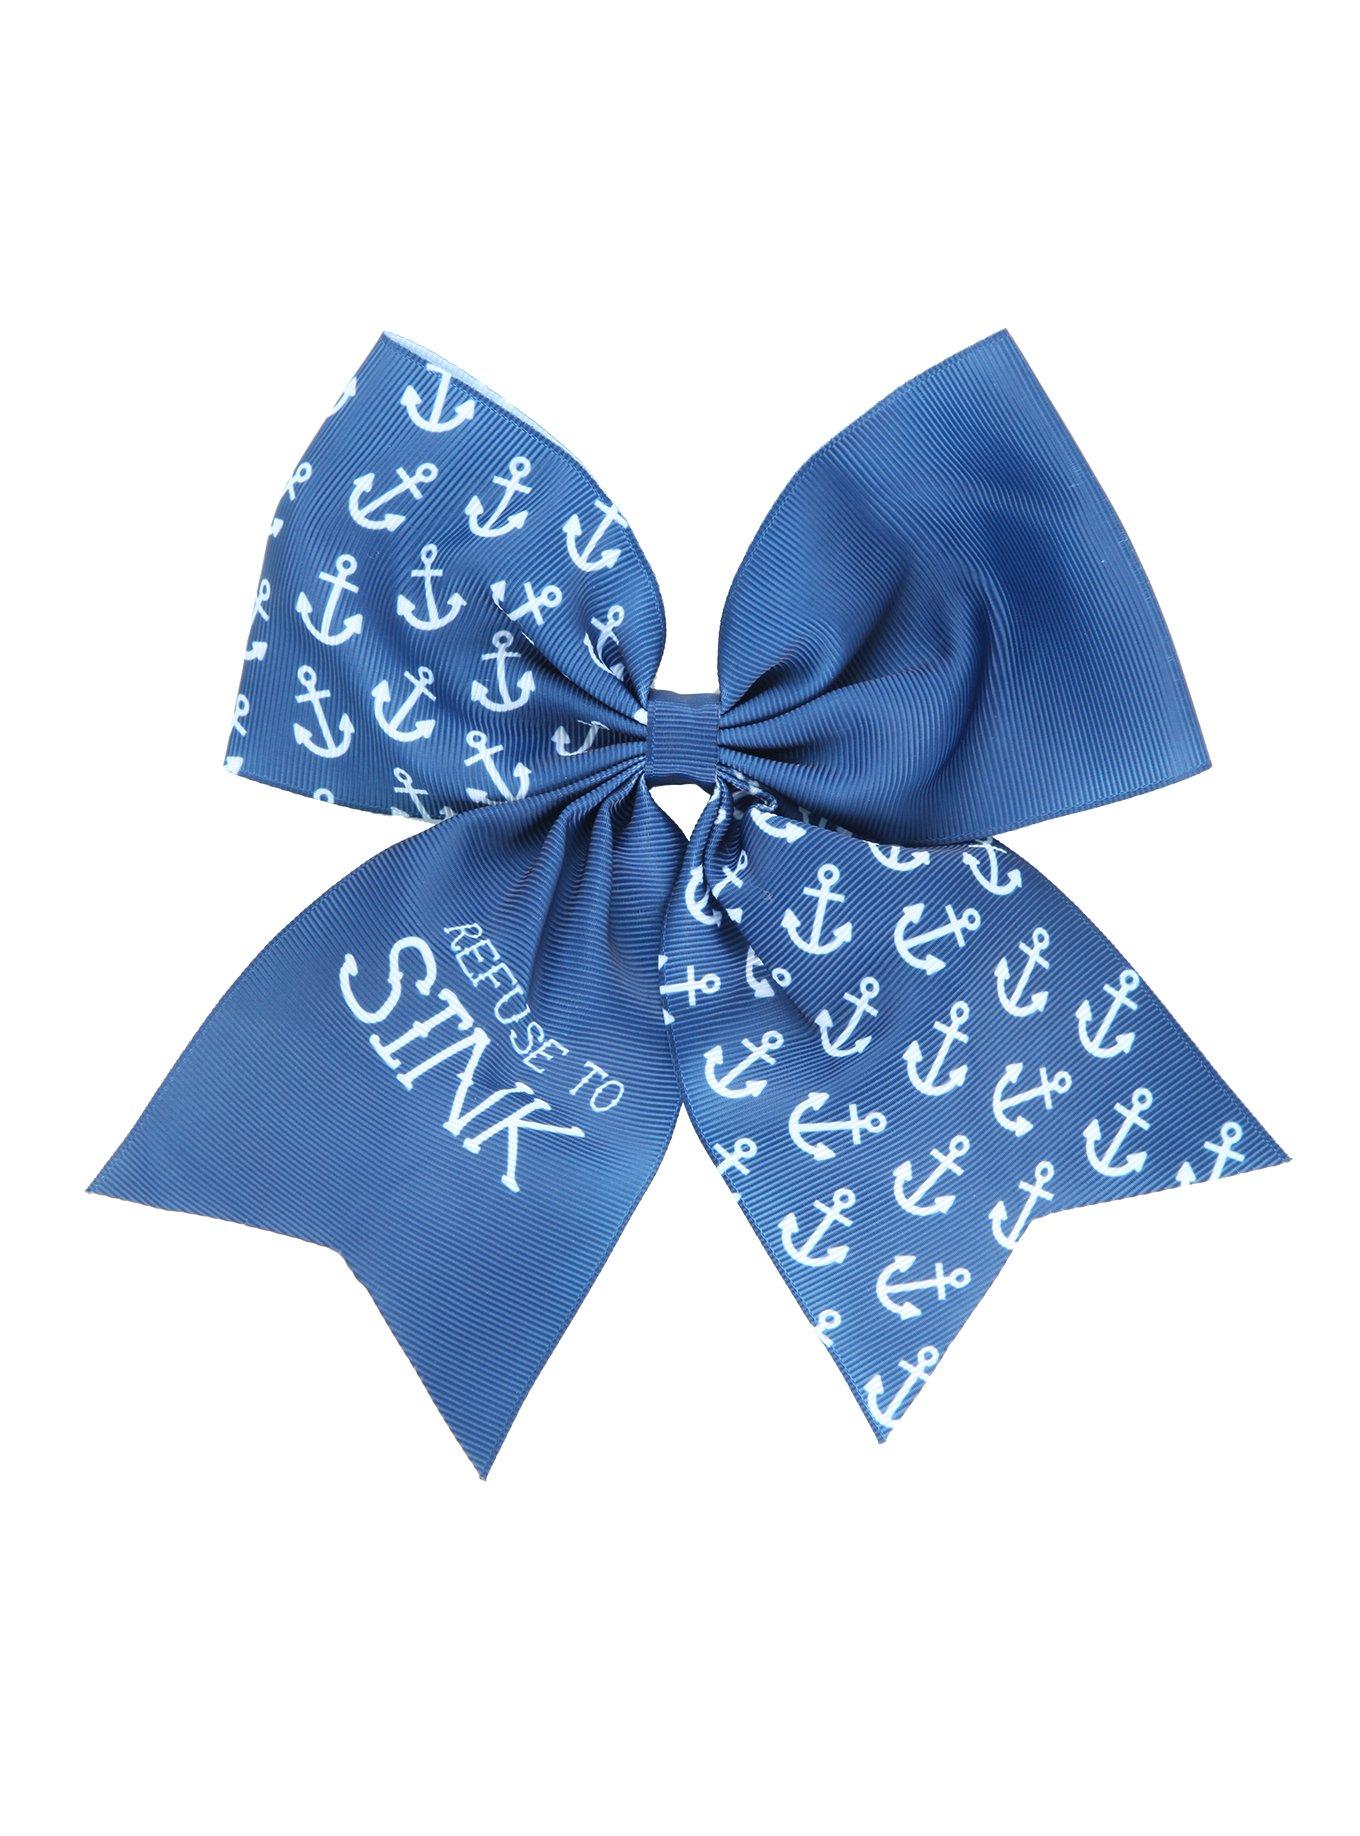 Blackheart Refuse To Sink Cheer Bow, , hi-res